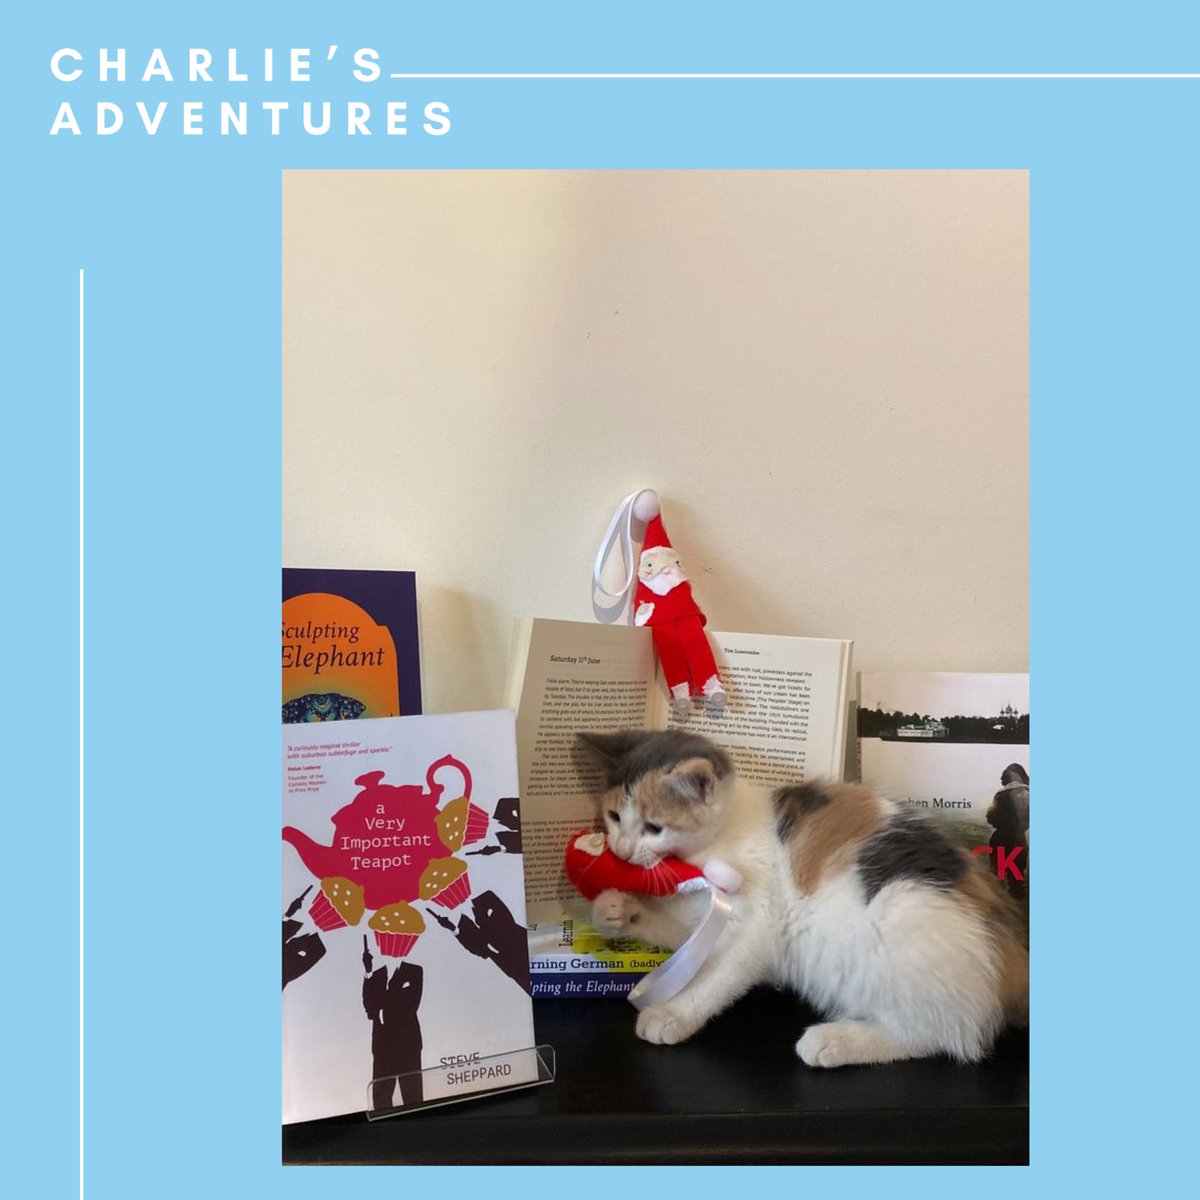 For this week’s edition of #CharliesAdventures we thought we’d throw it back a bit to a merry time over the Christmas period 💫 #CatsinPublishing #CatsOfTwitter #CatsOfTheQuarantine #ThrowbackTuesday